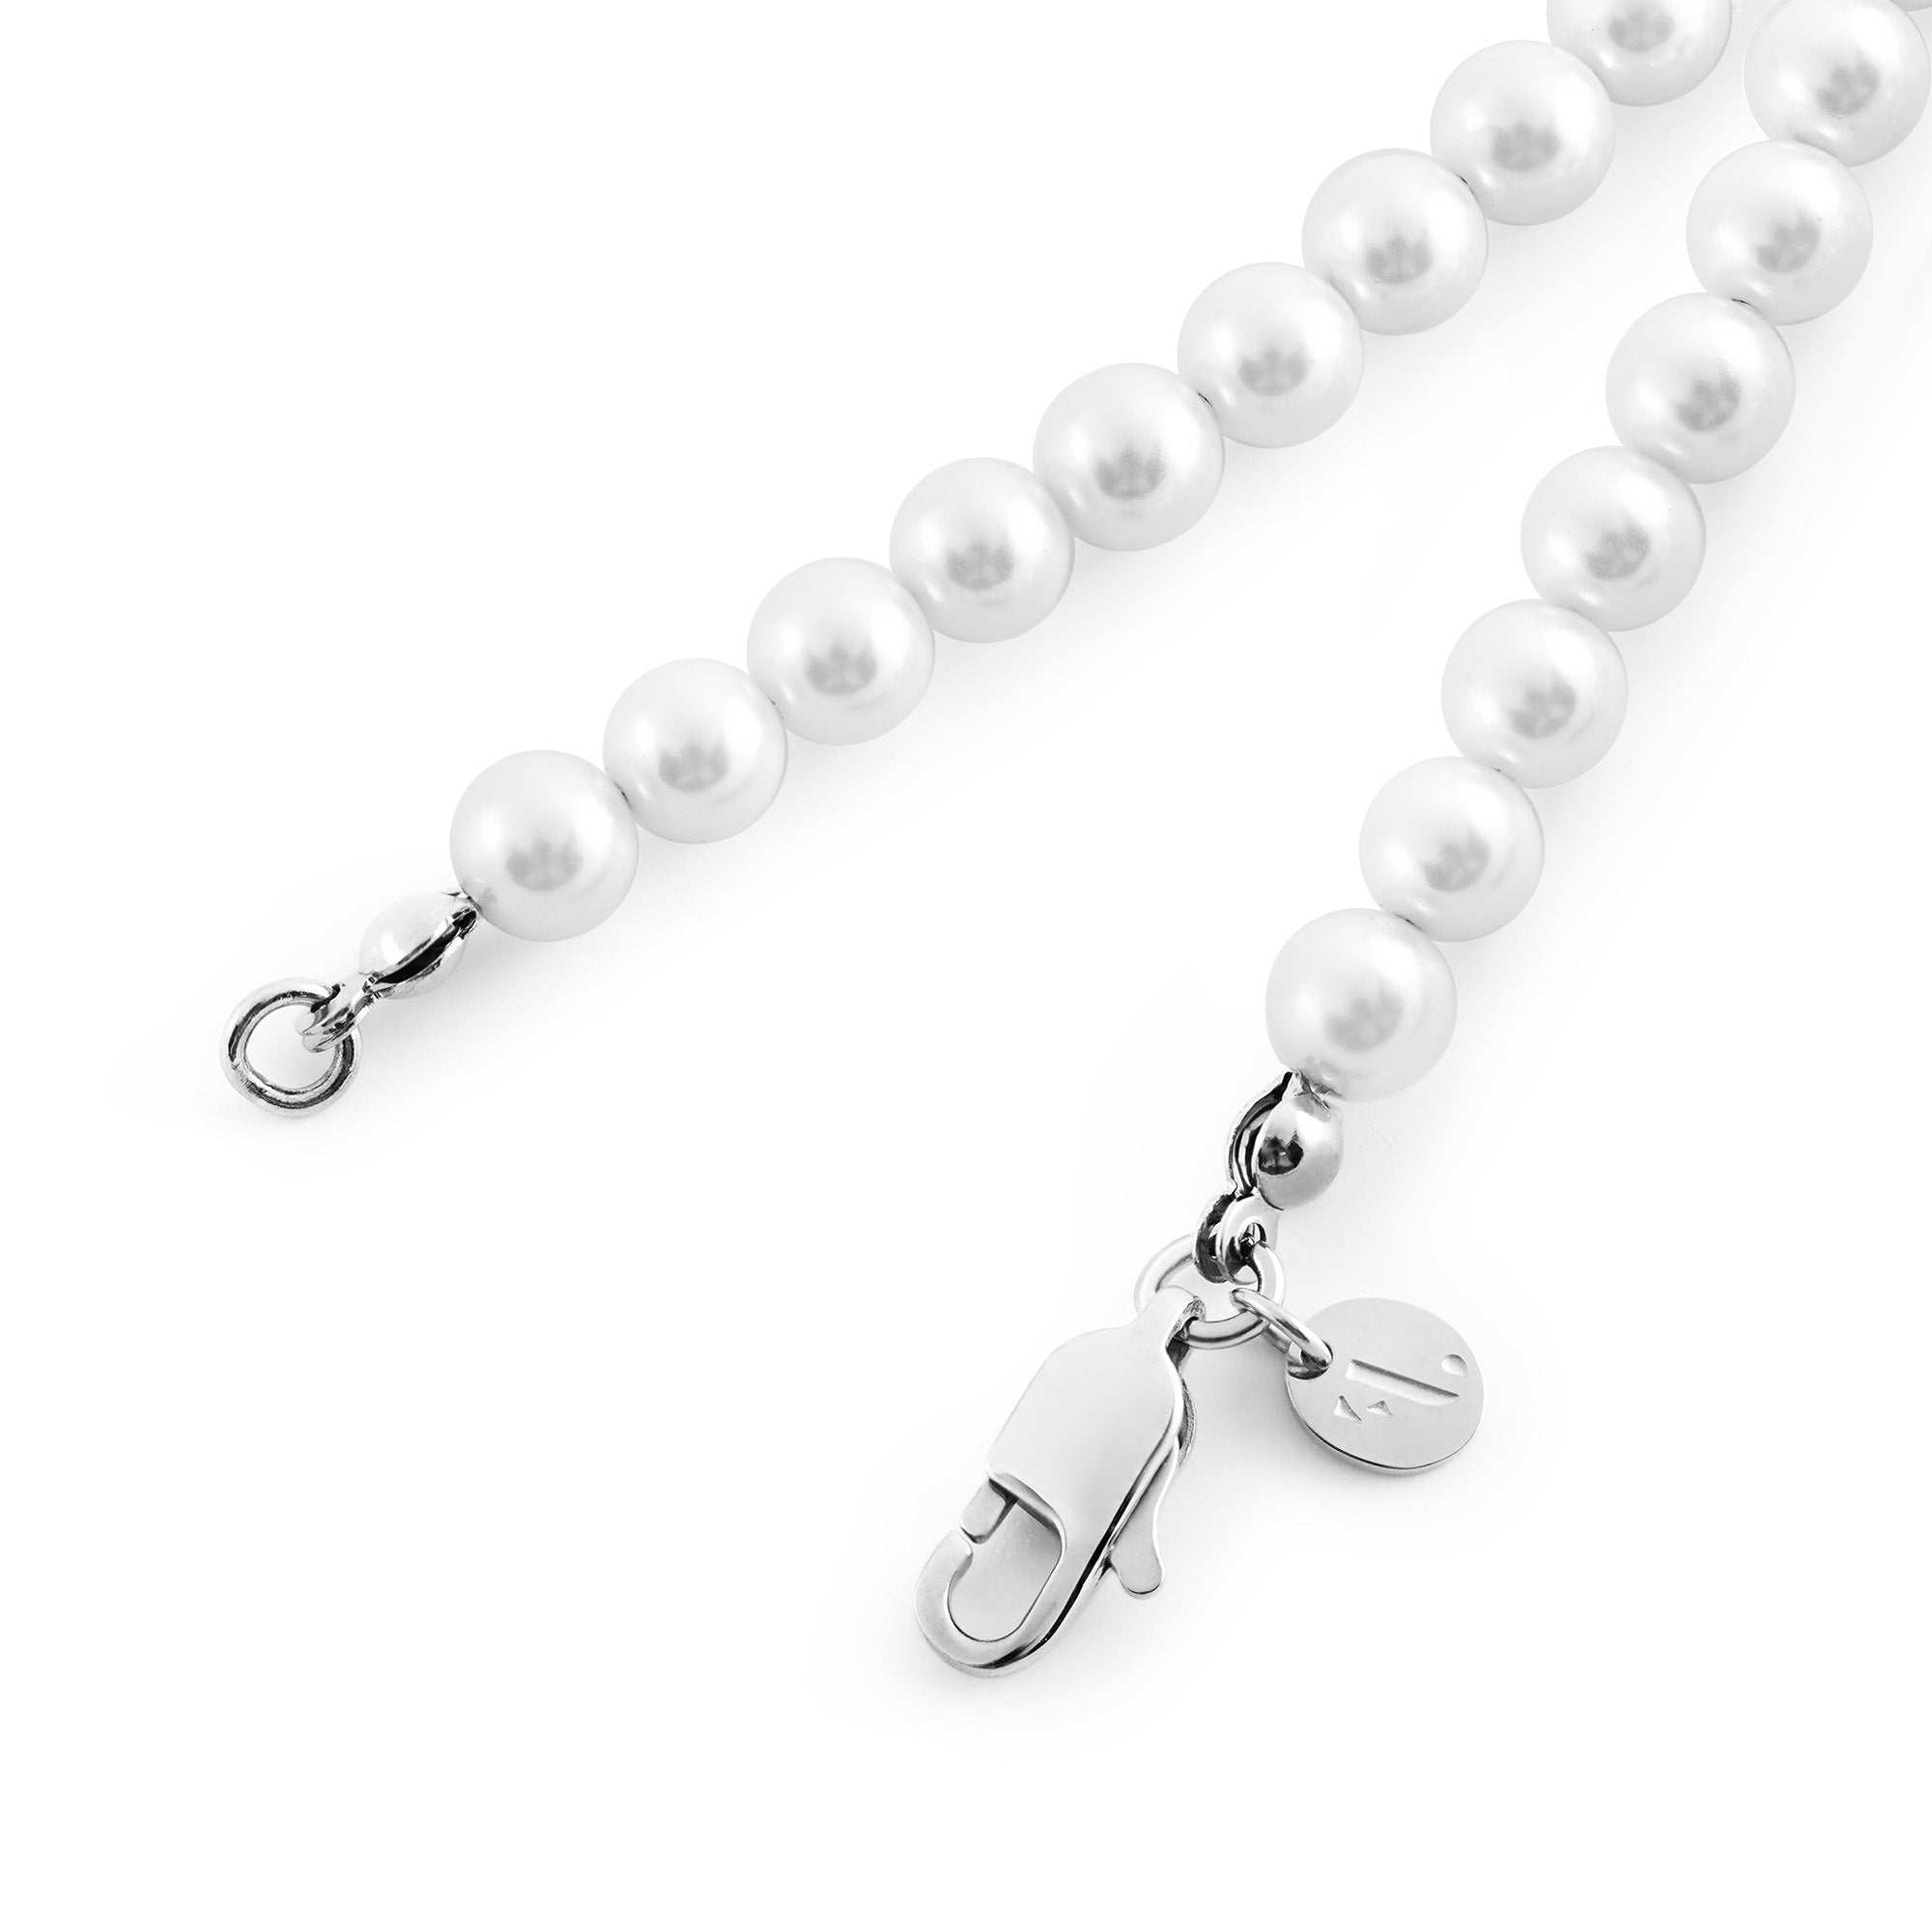 Var women's bracelet by Five Jwlry, designed with white glass pearls complemented by a silver stainless steel buckle. Available in sizes 20cm and 23cm. Crafted from water-resistant 316L stainless steel. Hypoallergenic with a 2-year warranty.